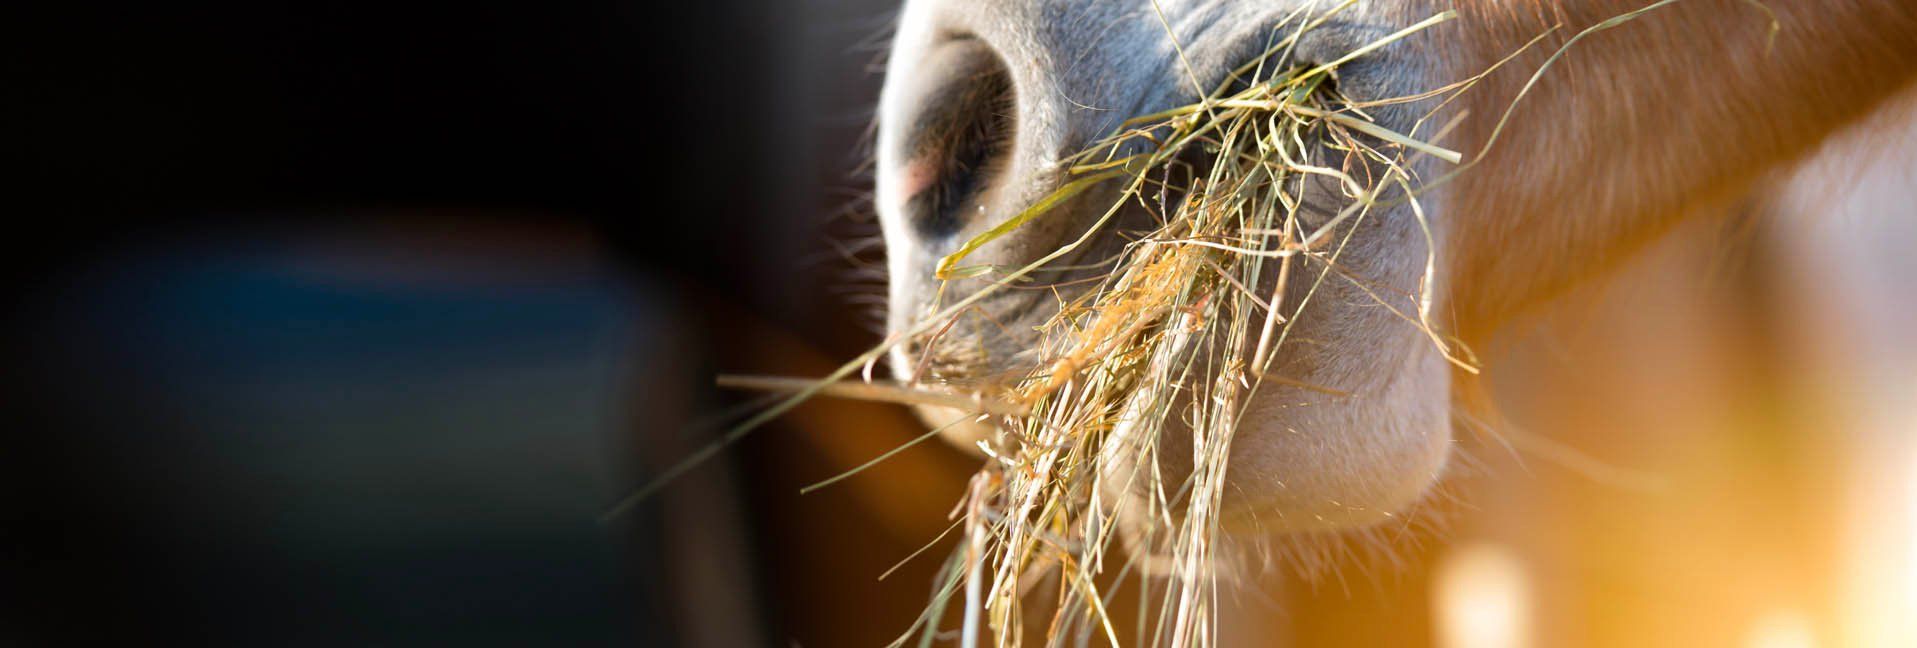 What the Hay? Stocking the hay barn with your senses